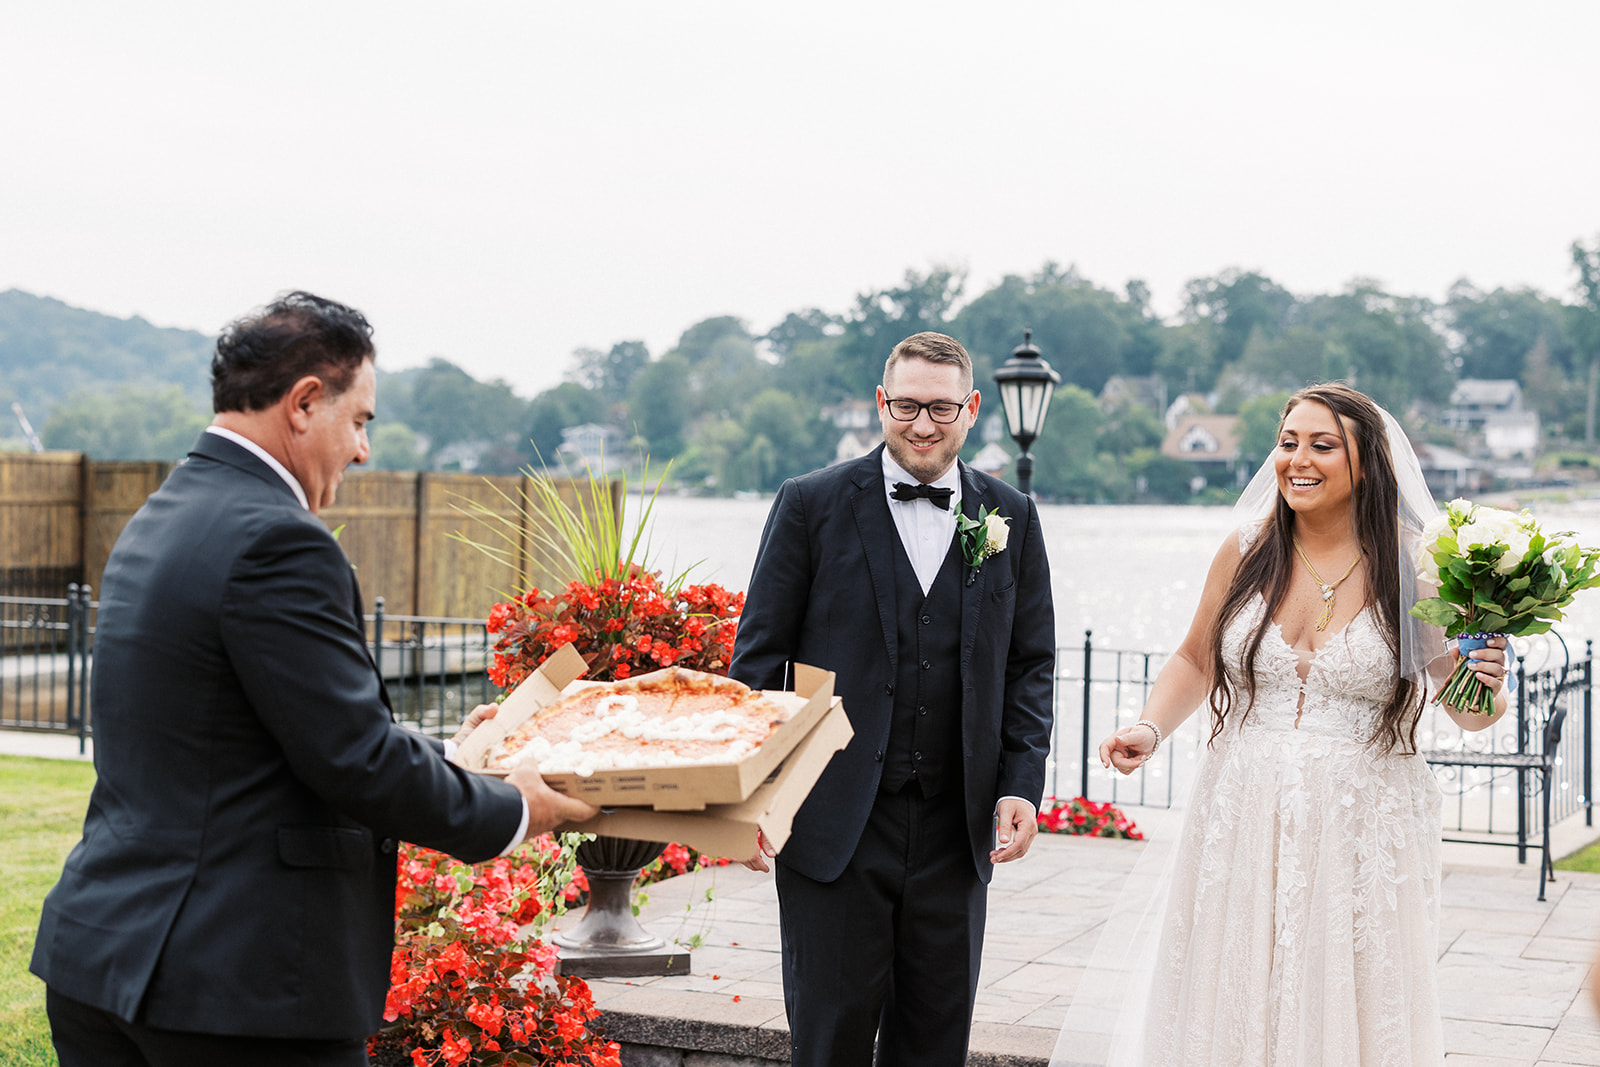 A dad in a black suit presents newlyweds with a pizza decorated